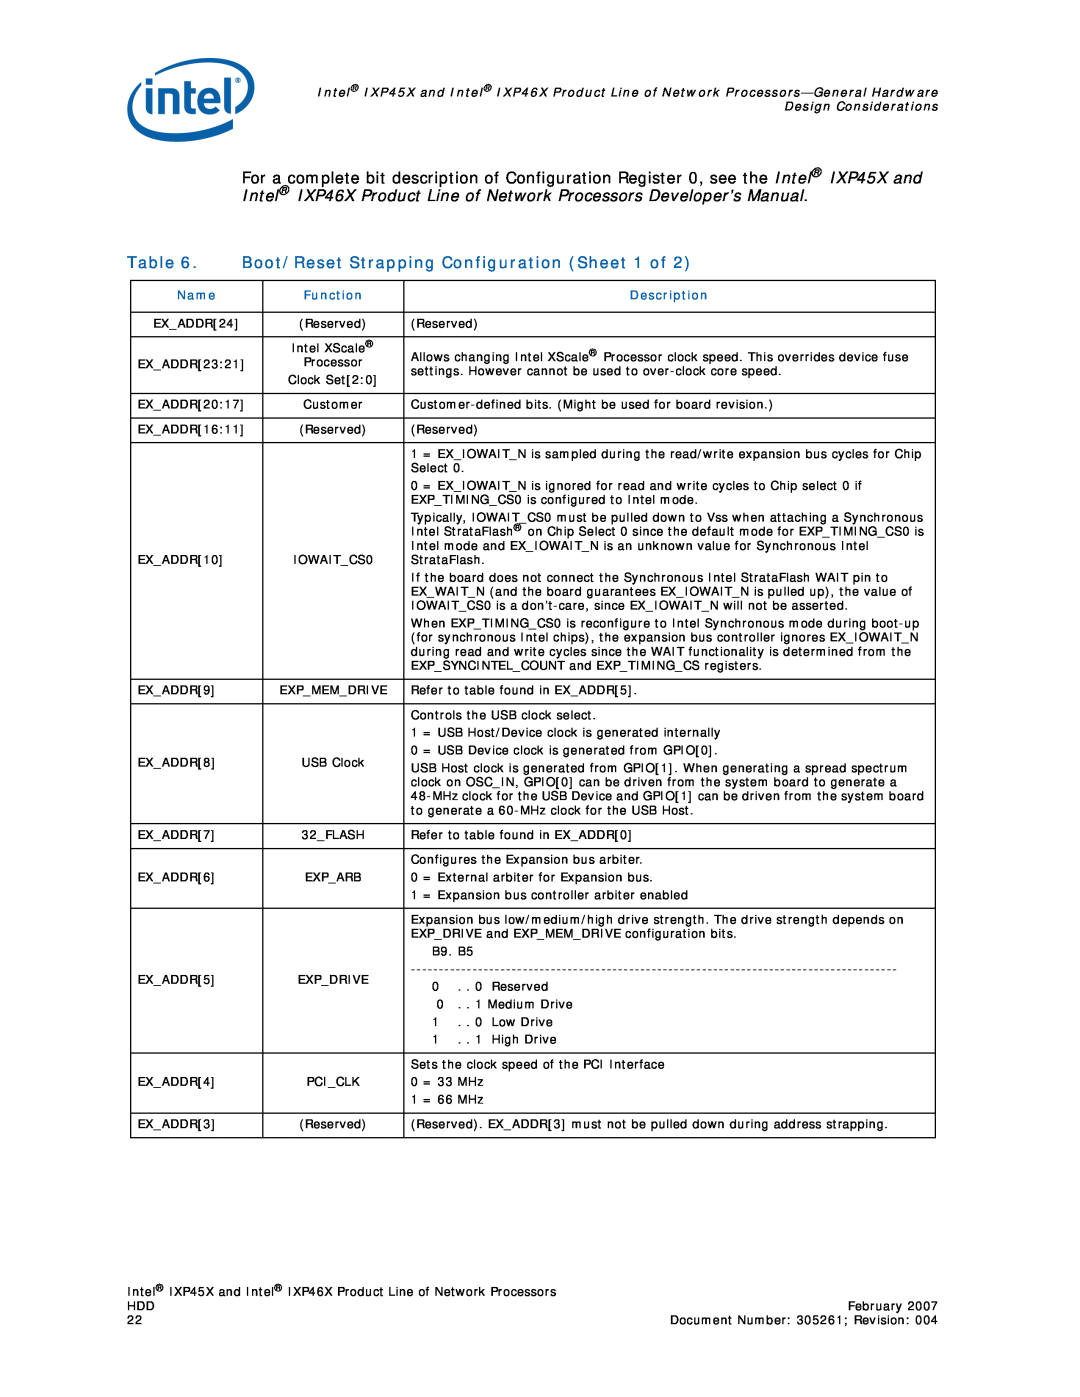 Intel IXP46X, IXP45X manual Boot/Reset Strapping Configuration Sheet 1 of, Table, Name, Function, Description 